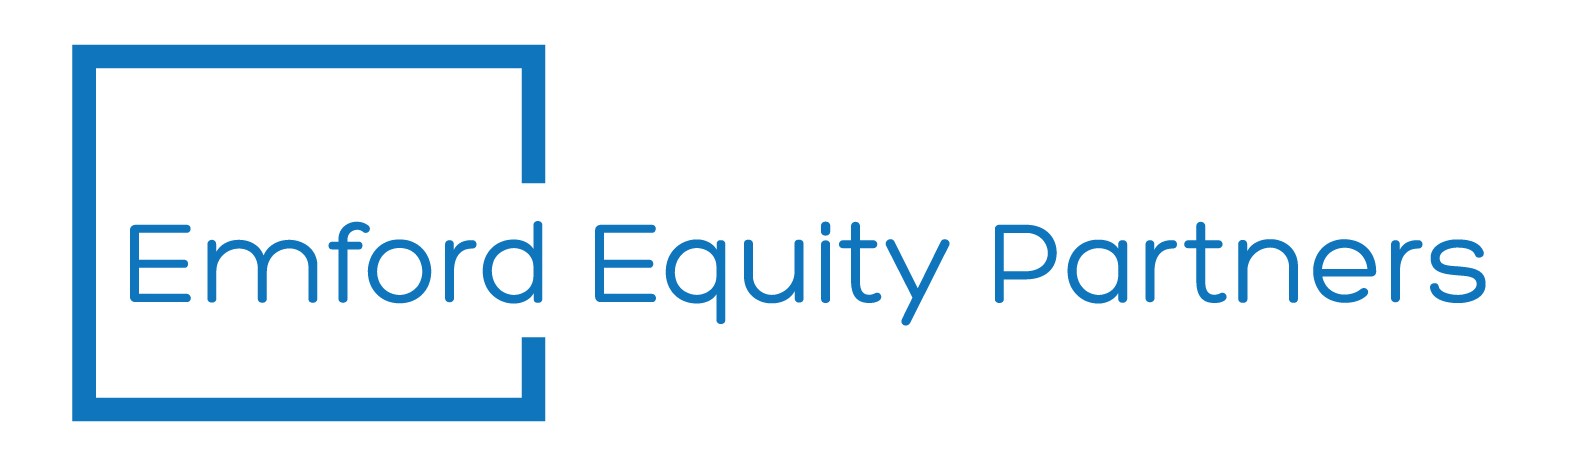 Emford Equity Partners